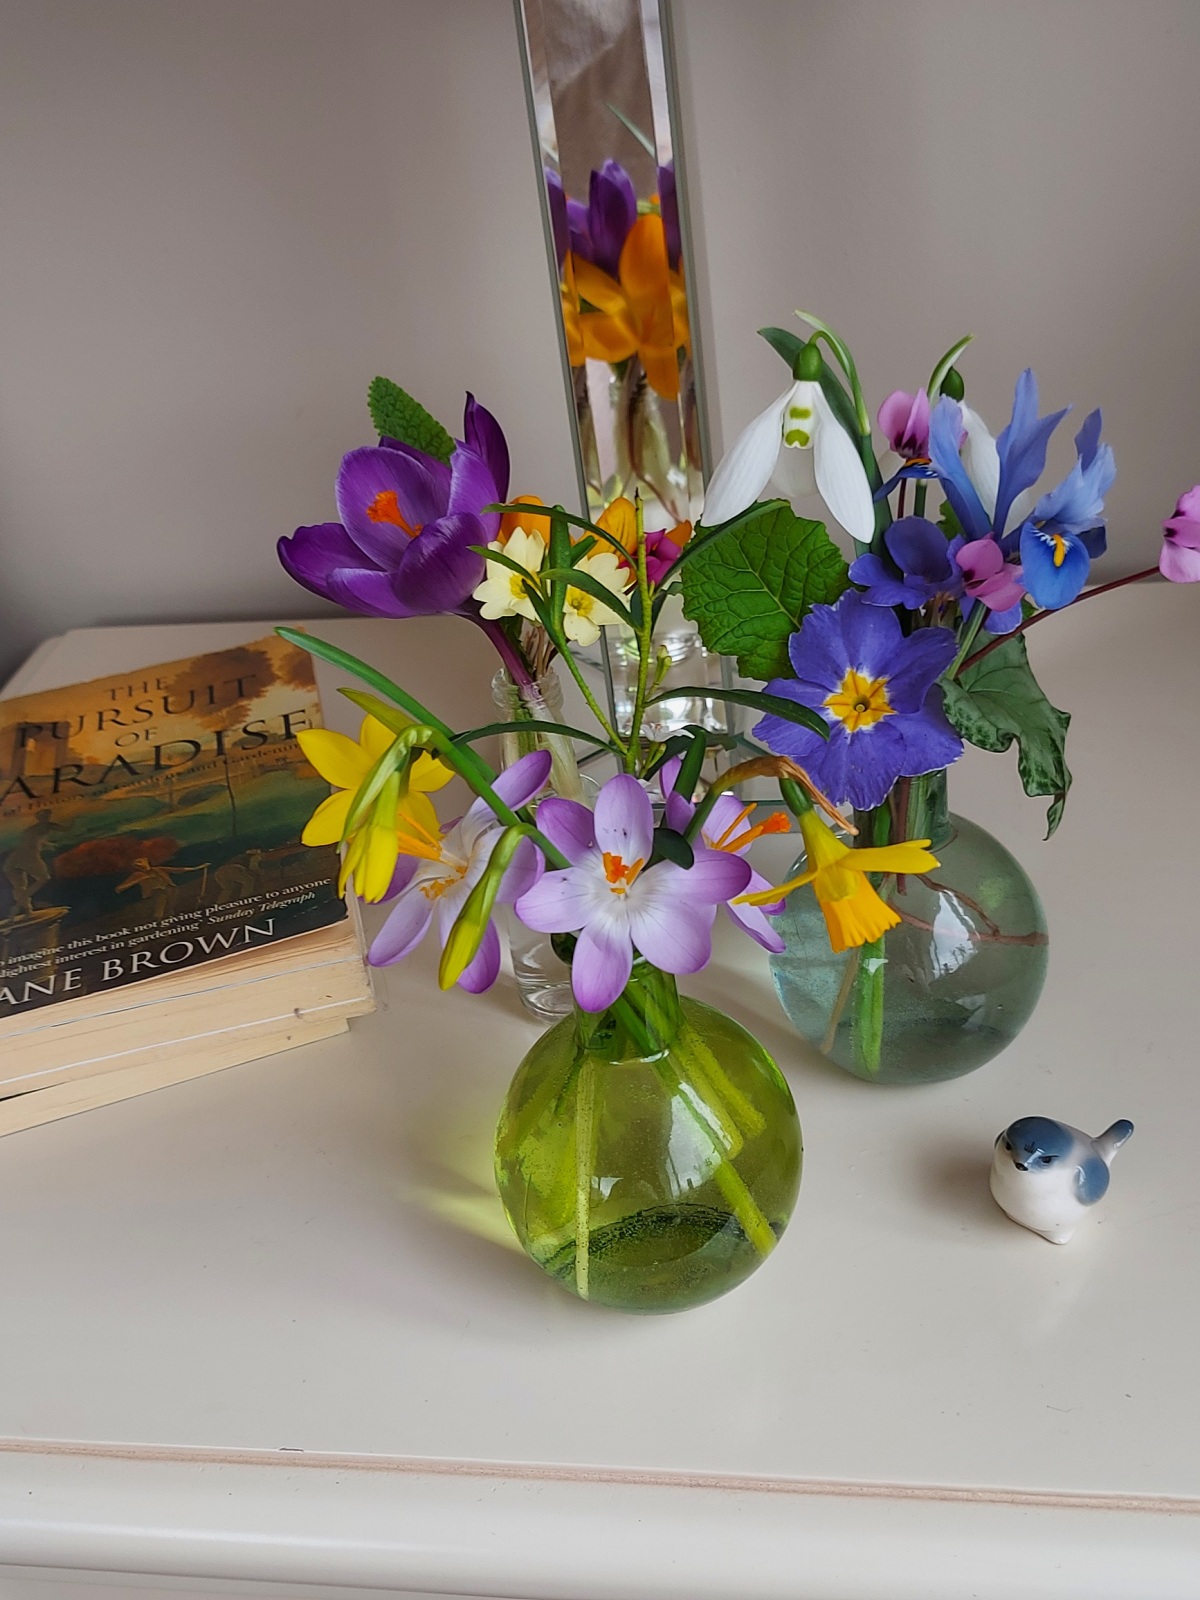 A collection of miniature flower arrangements using February flowers